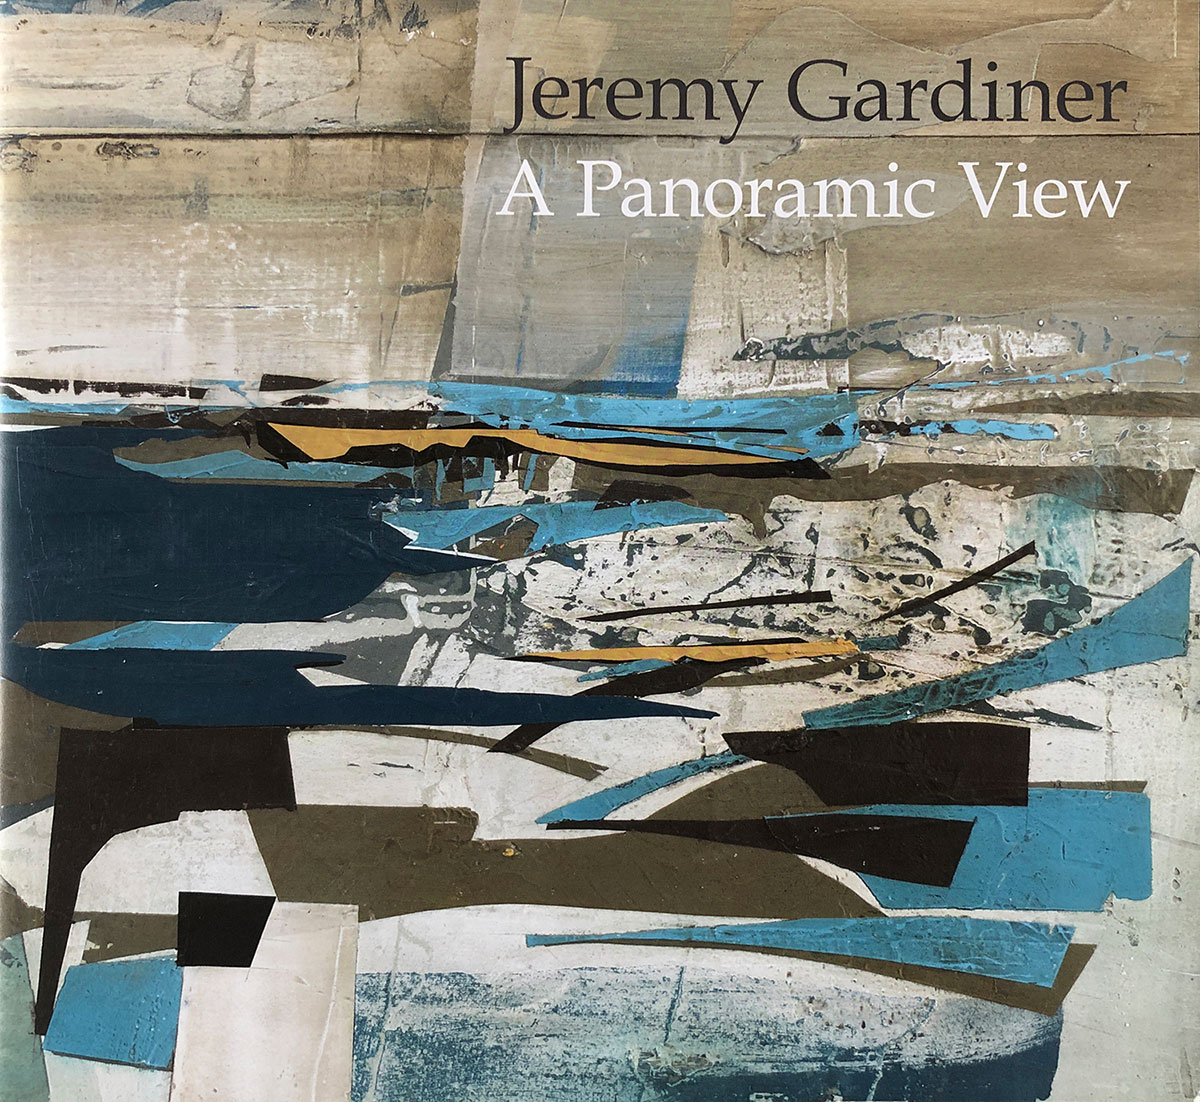 The book cover of A Panoramic View by Jeremy Gardiner